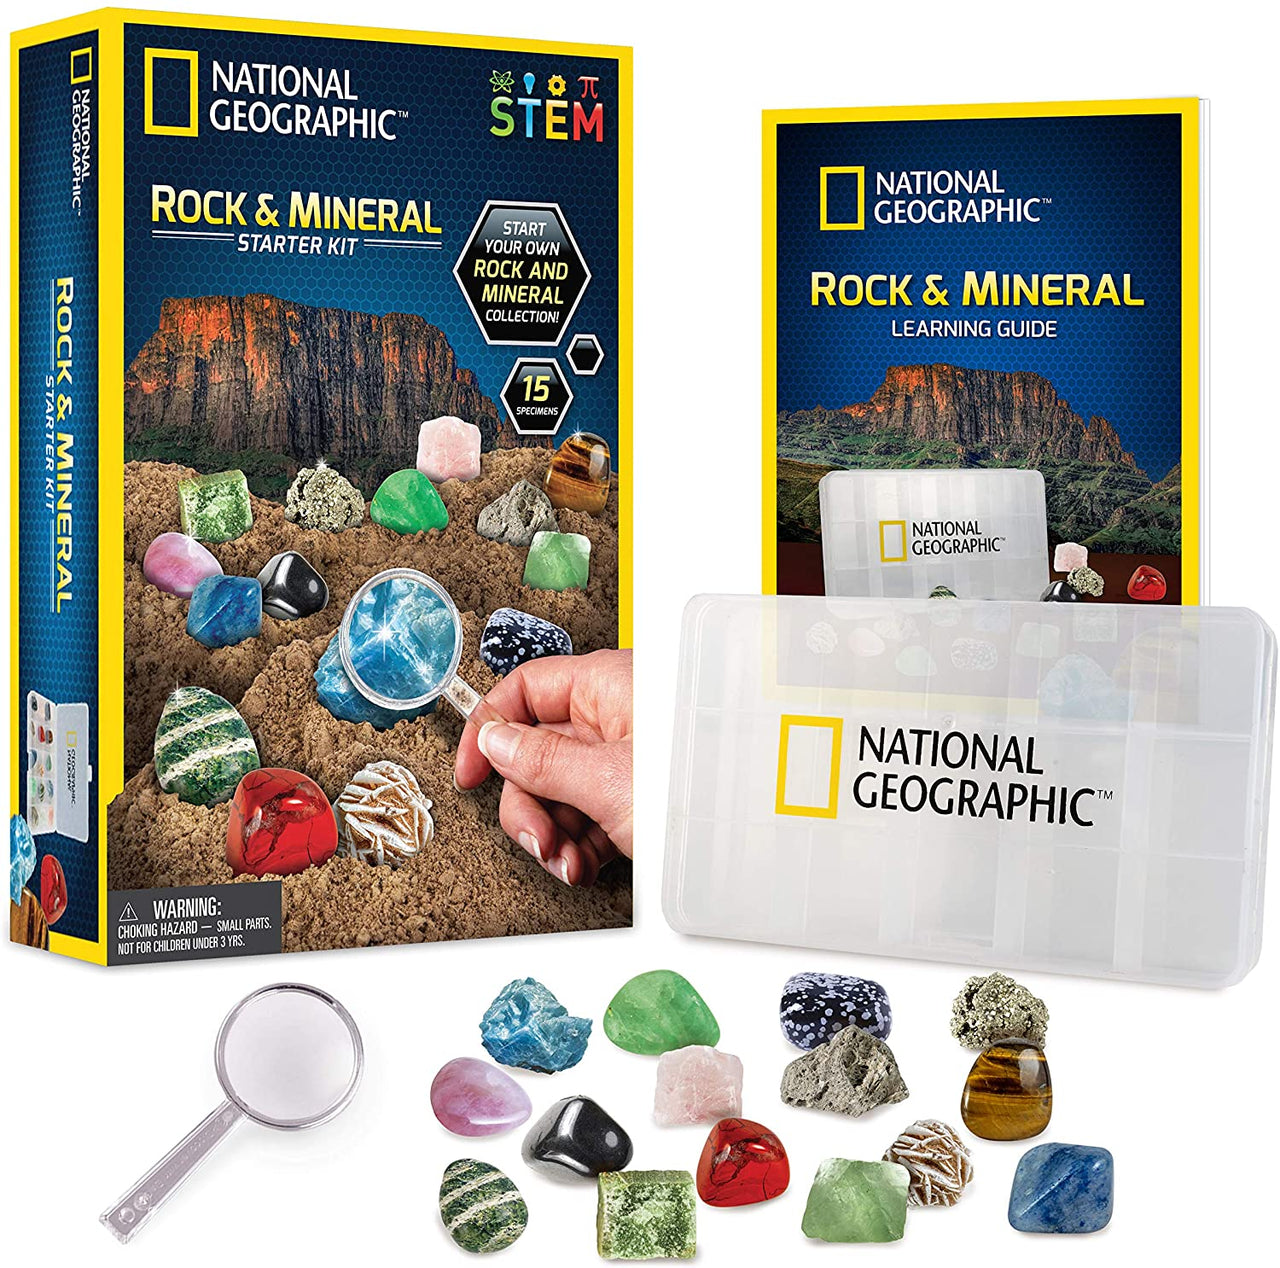 national geographic rocks and minerals education set